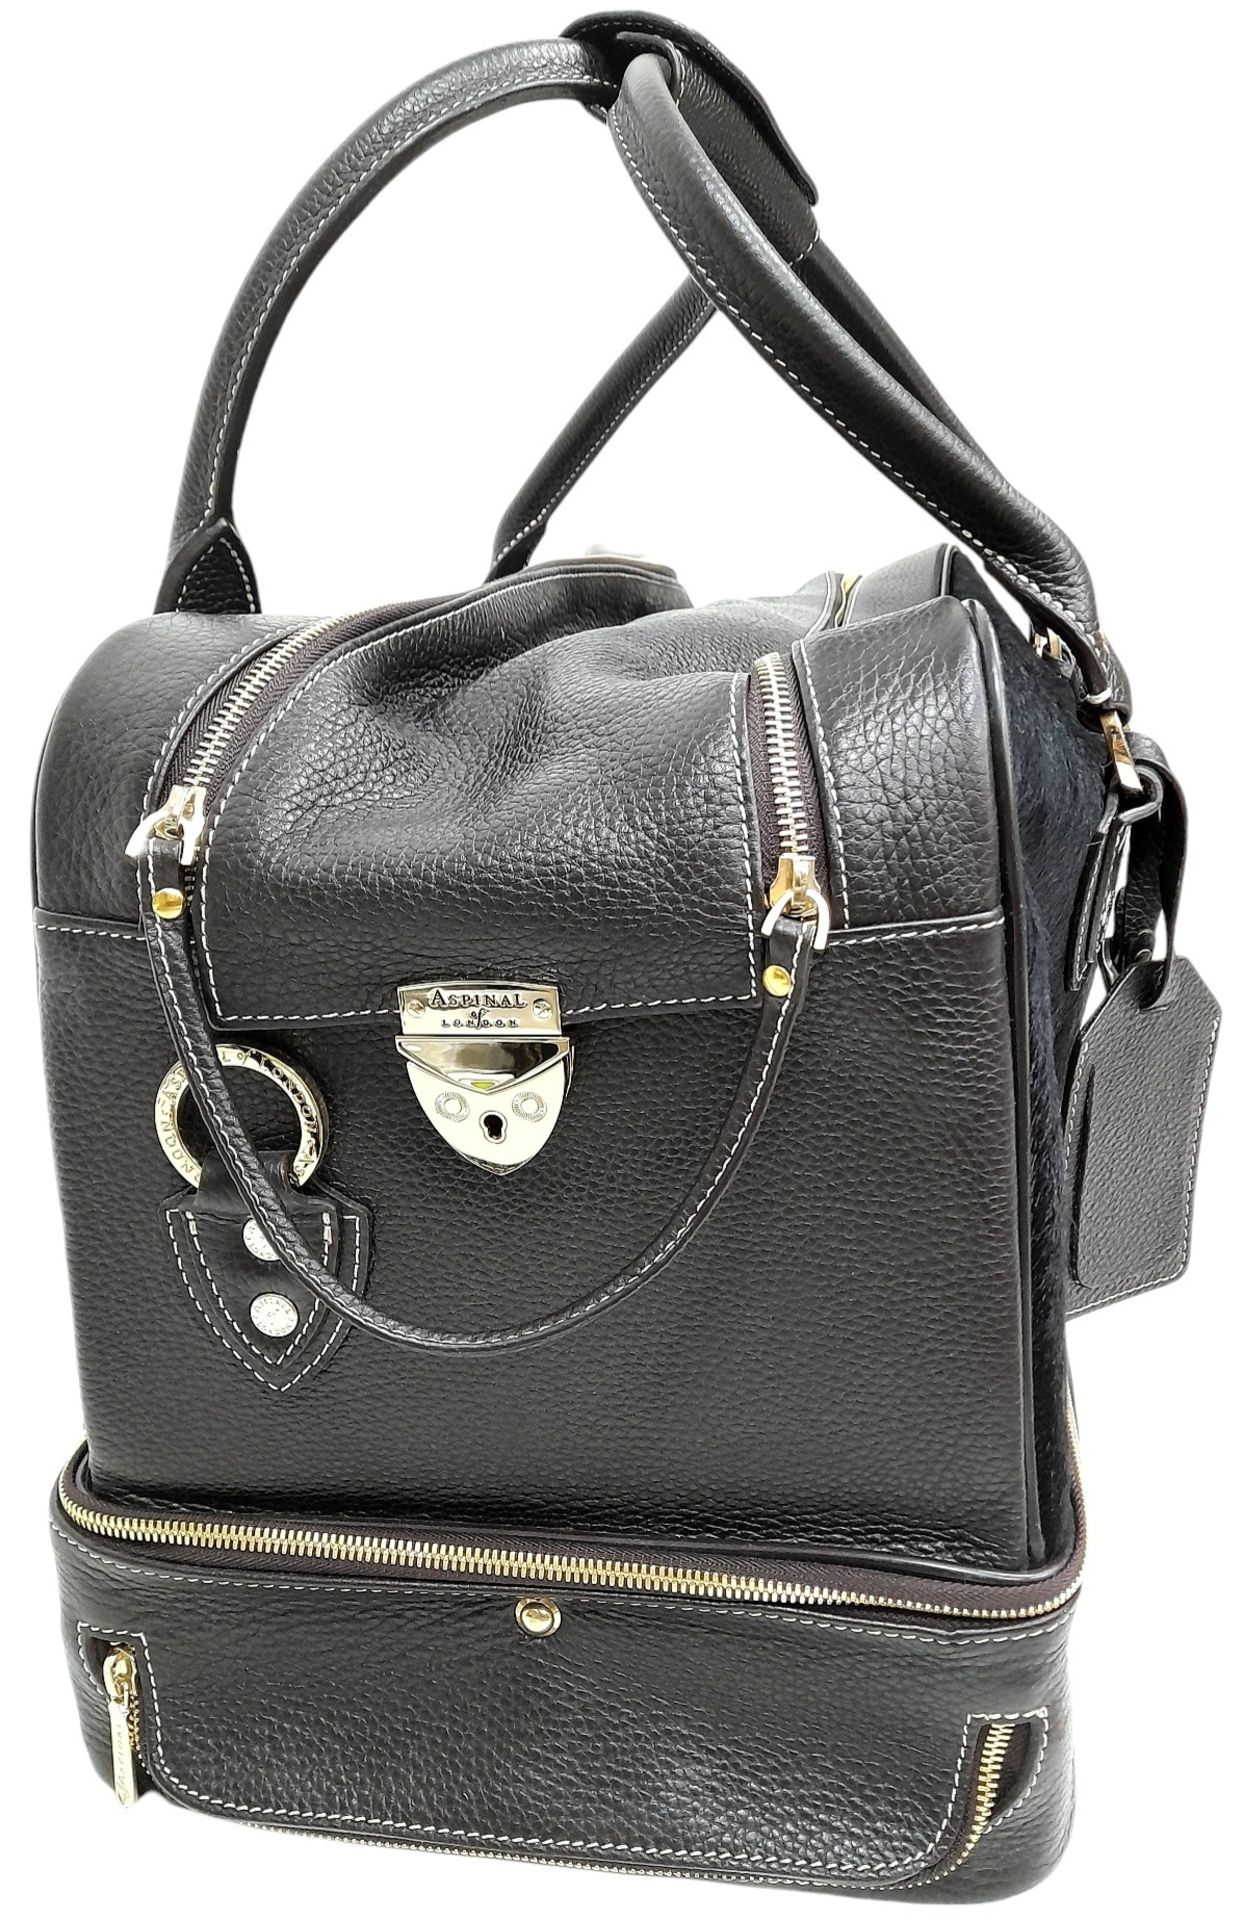 An Aspinal Brown Portofino Convertible Luggage Bag. Leather and pony fur exterior with gold-toned - Bild 16 aus 16